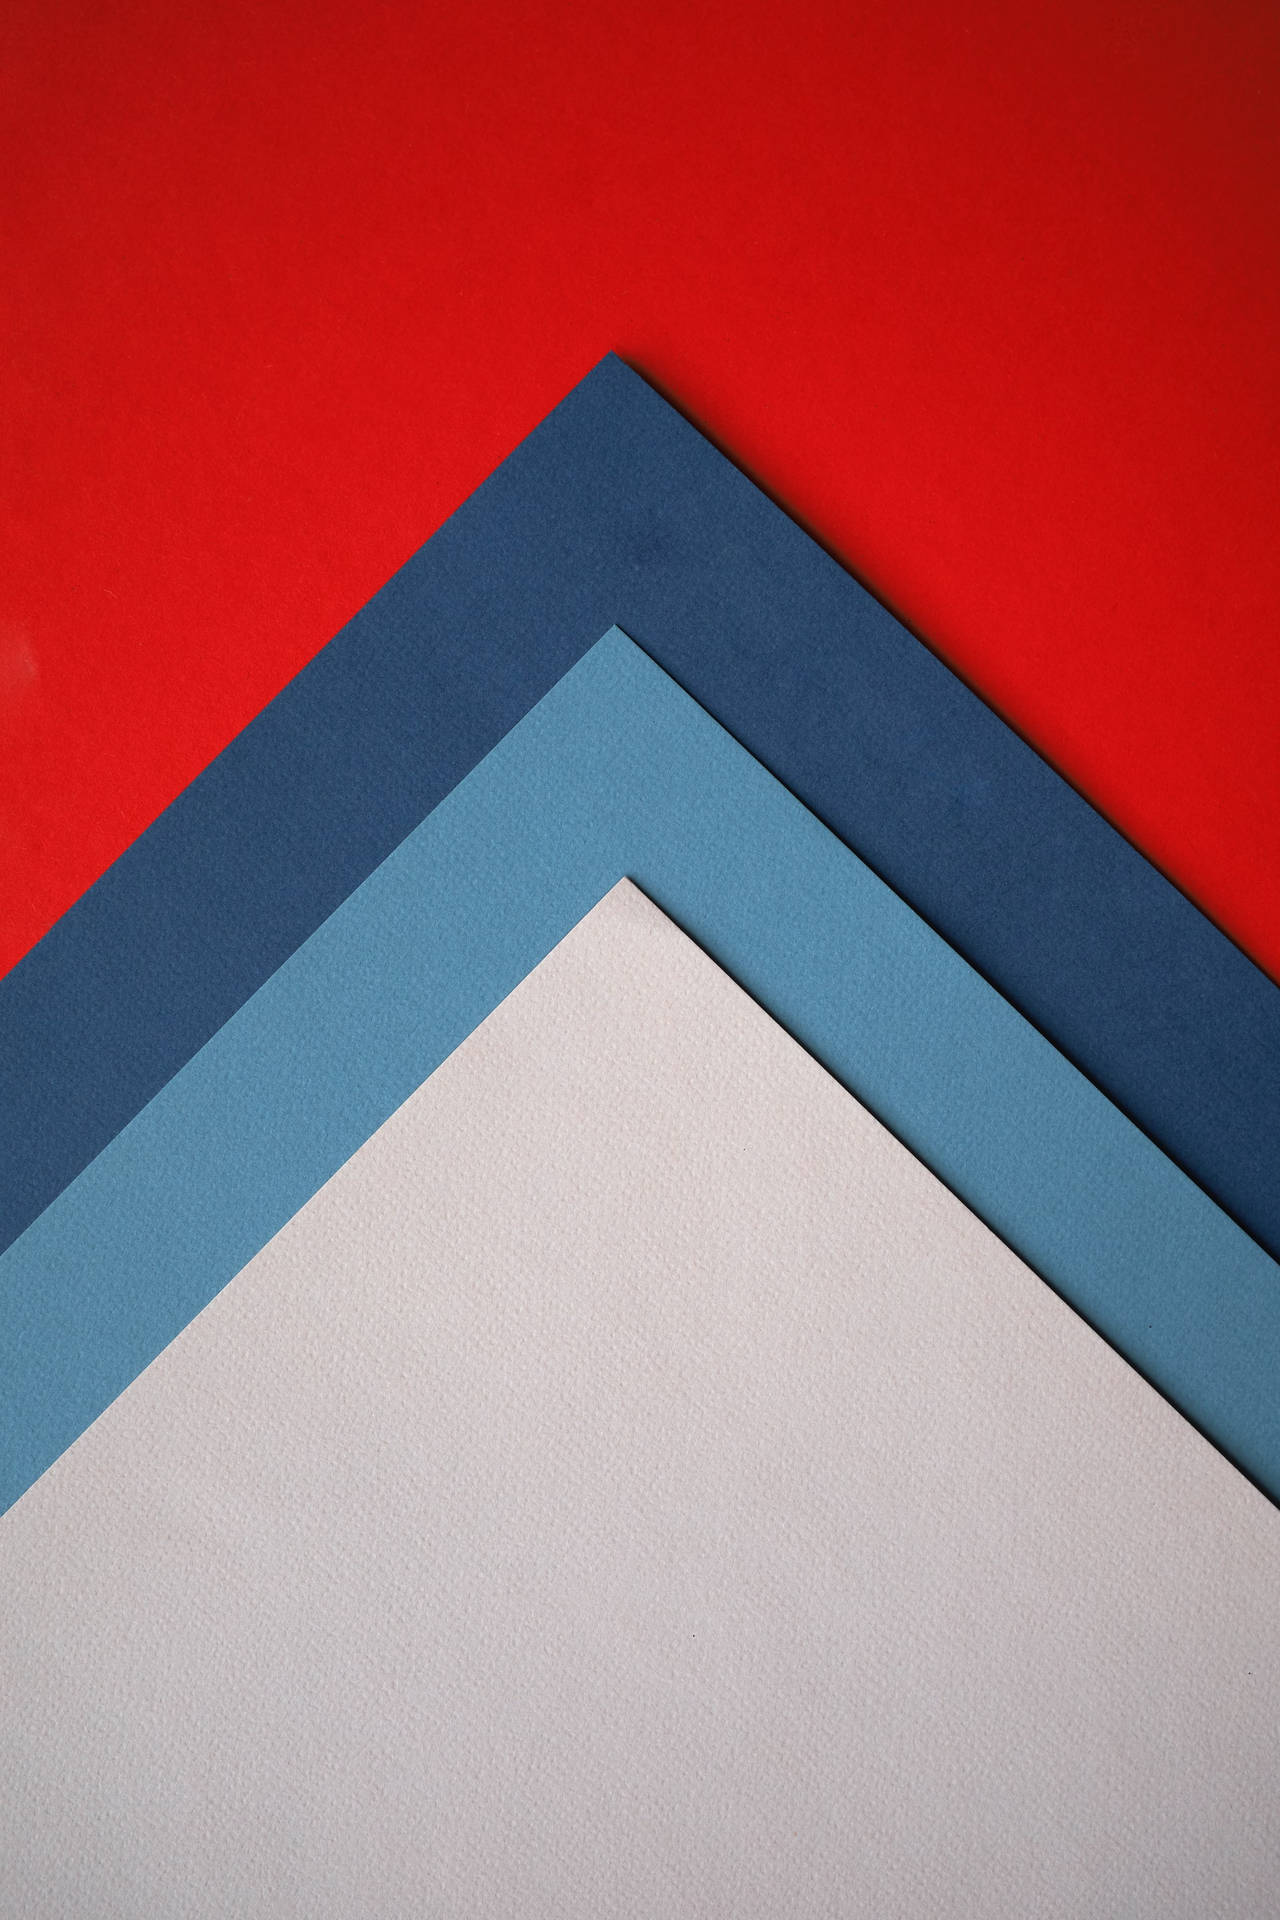 Triangles Layered Tip For Lenovo Tablet Screen Background